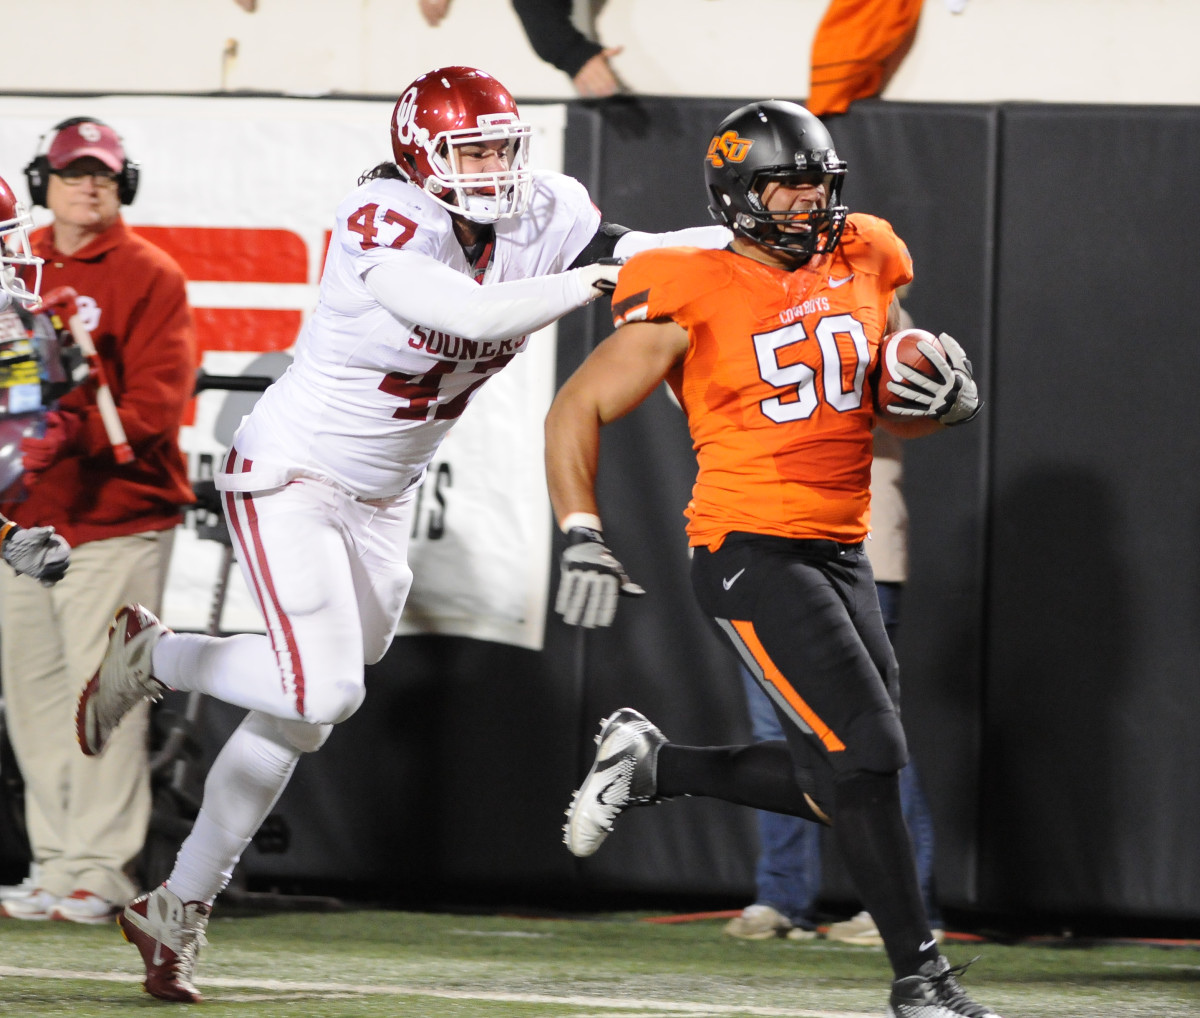 Jamie Blatnick is known for this fumble recovery and scoop and return in the 2011 Bedlam win.